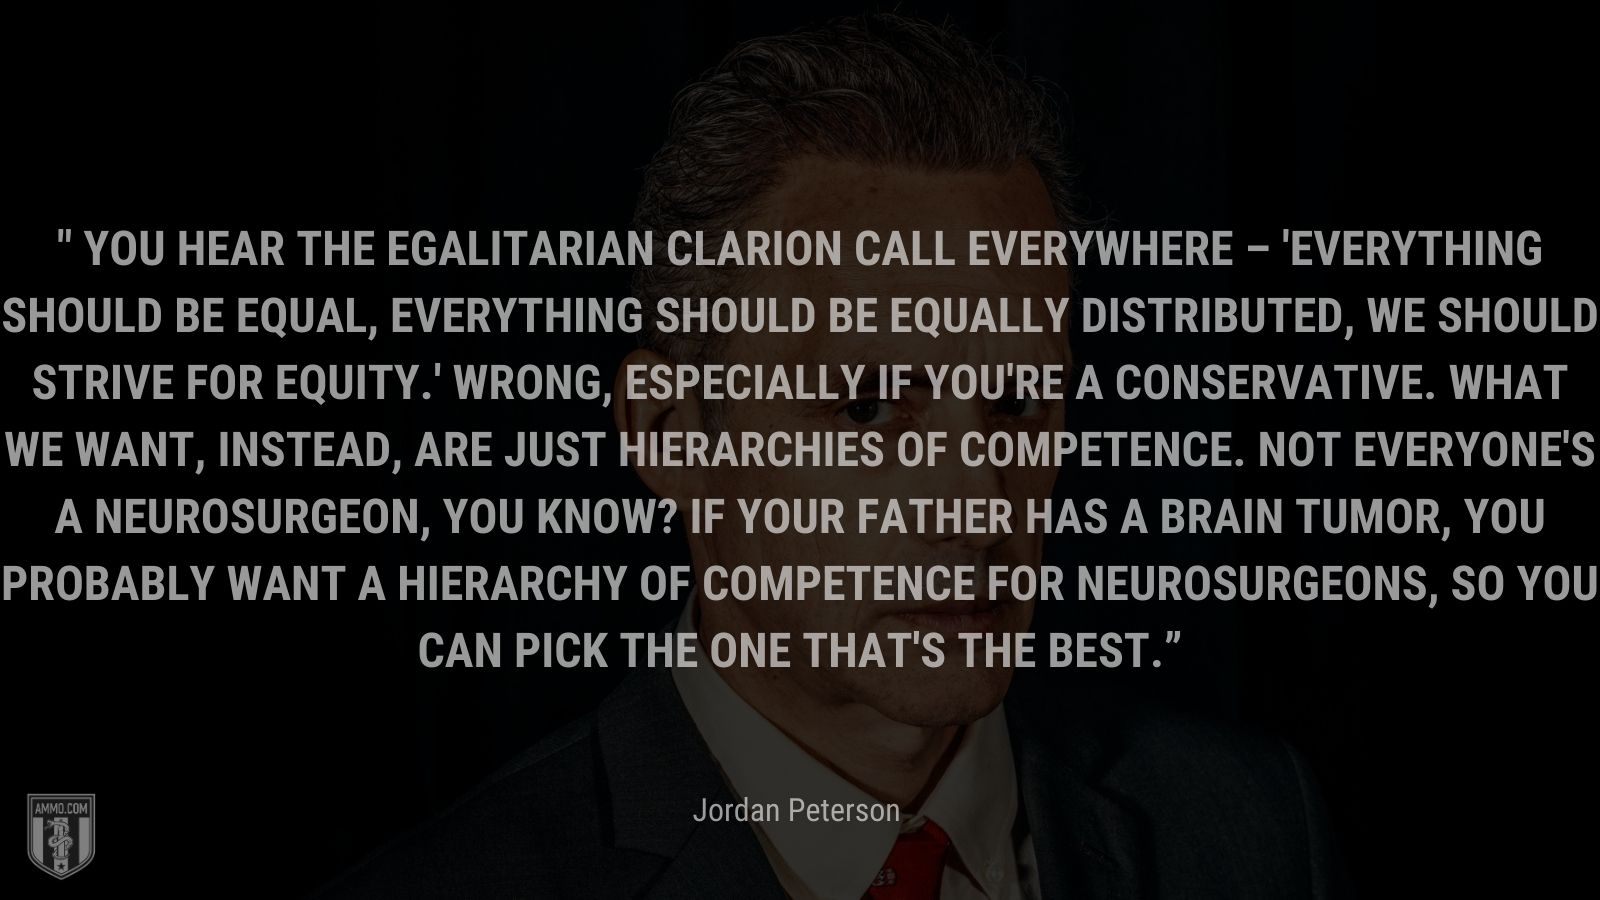 “ “You hear the egalitarian clarion call everywhere – 'Everything should be equal, everything should be equally distributed, we should strive for equity.' Wrong, especially if you're a conservative. What we want, instead, are just hierarchies of competence. Not everyone's a neurosurgeon, you know? If your father has a brain tumor, you probably want a hierarchy of competence for neurosurgeons, so you can pick the one that's the best. ” - Jordan Peterson